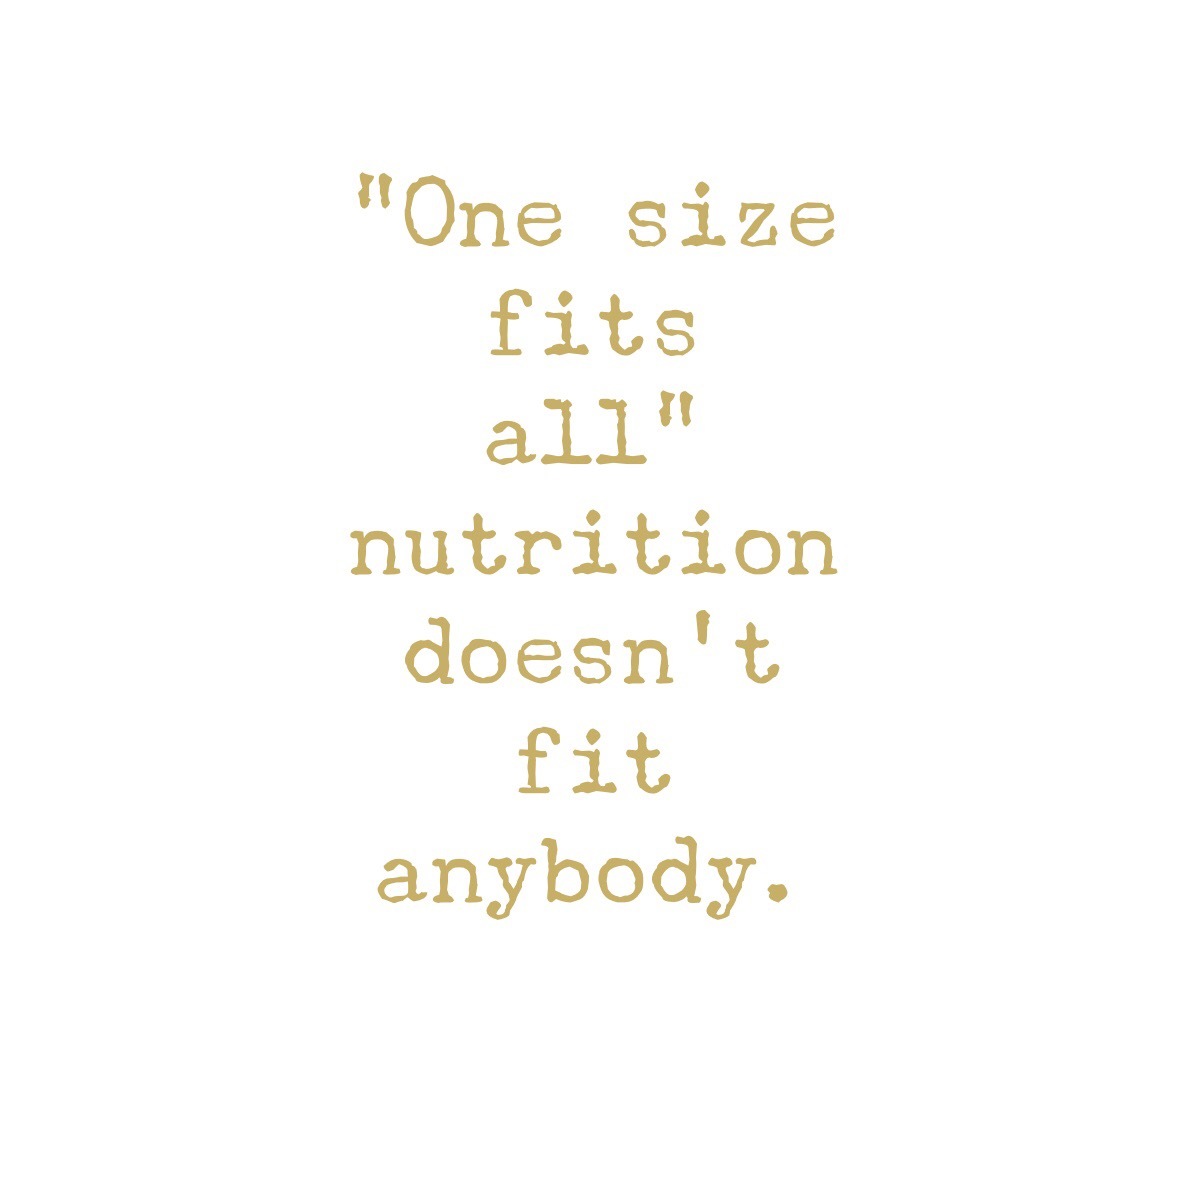 Quotes, Nutrition, Fitness